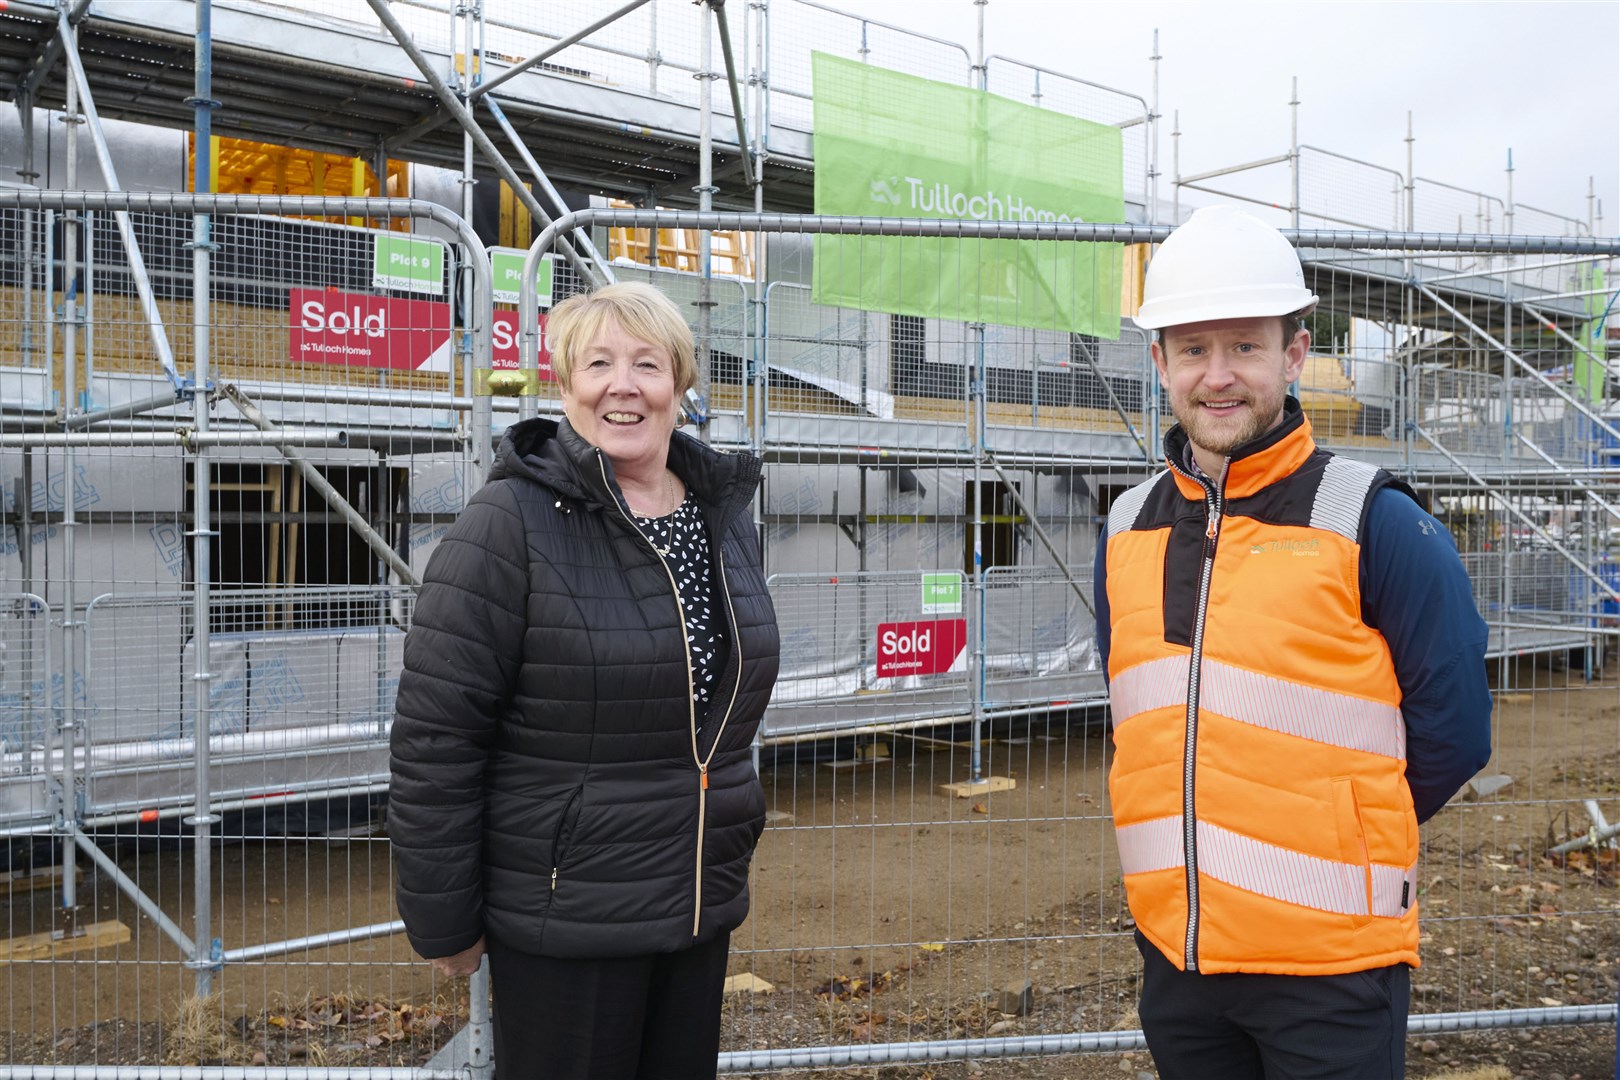 Carol Stuart, Tulloch Homes sales consultant, at Bynack More and site manager Zander Sutherland.